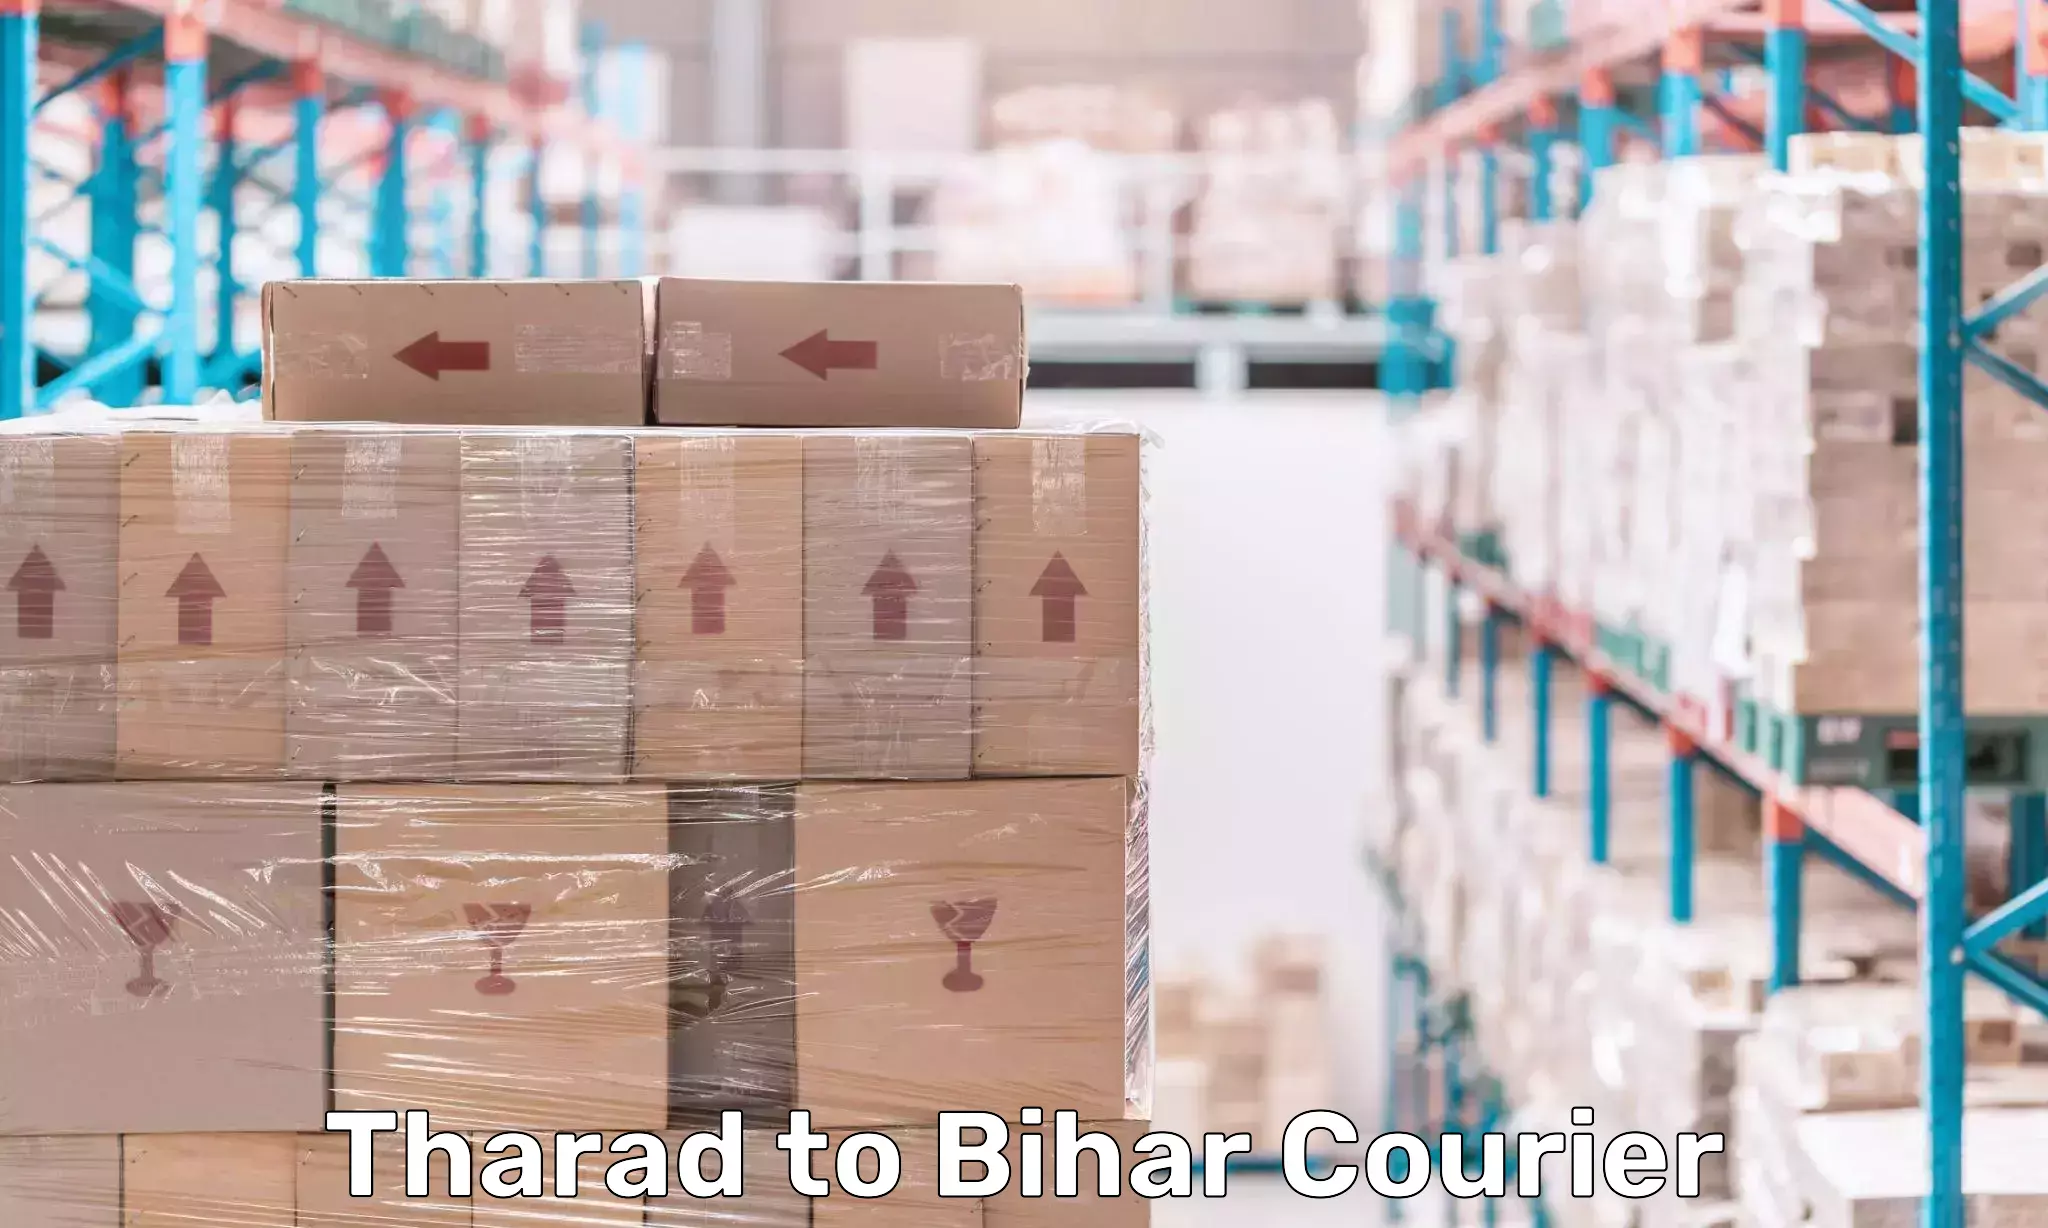 Global shipping solutions in Tharad to Bettiah